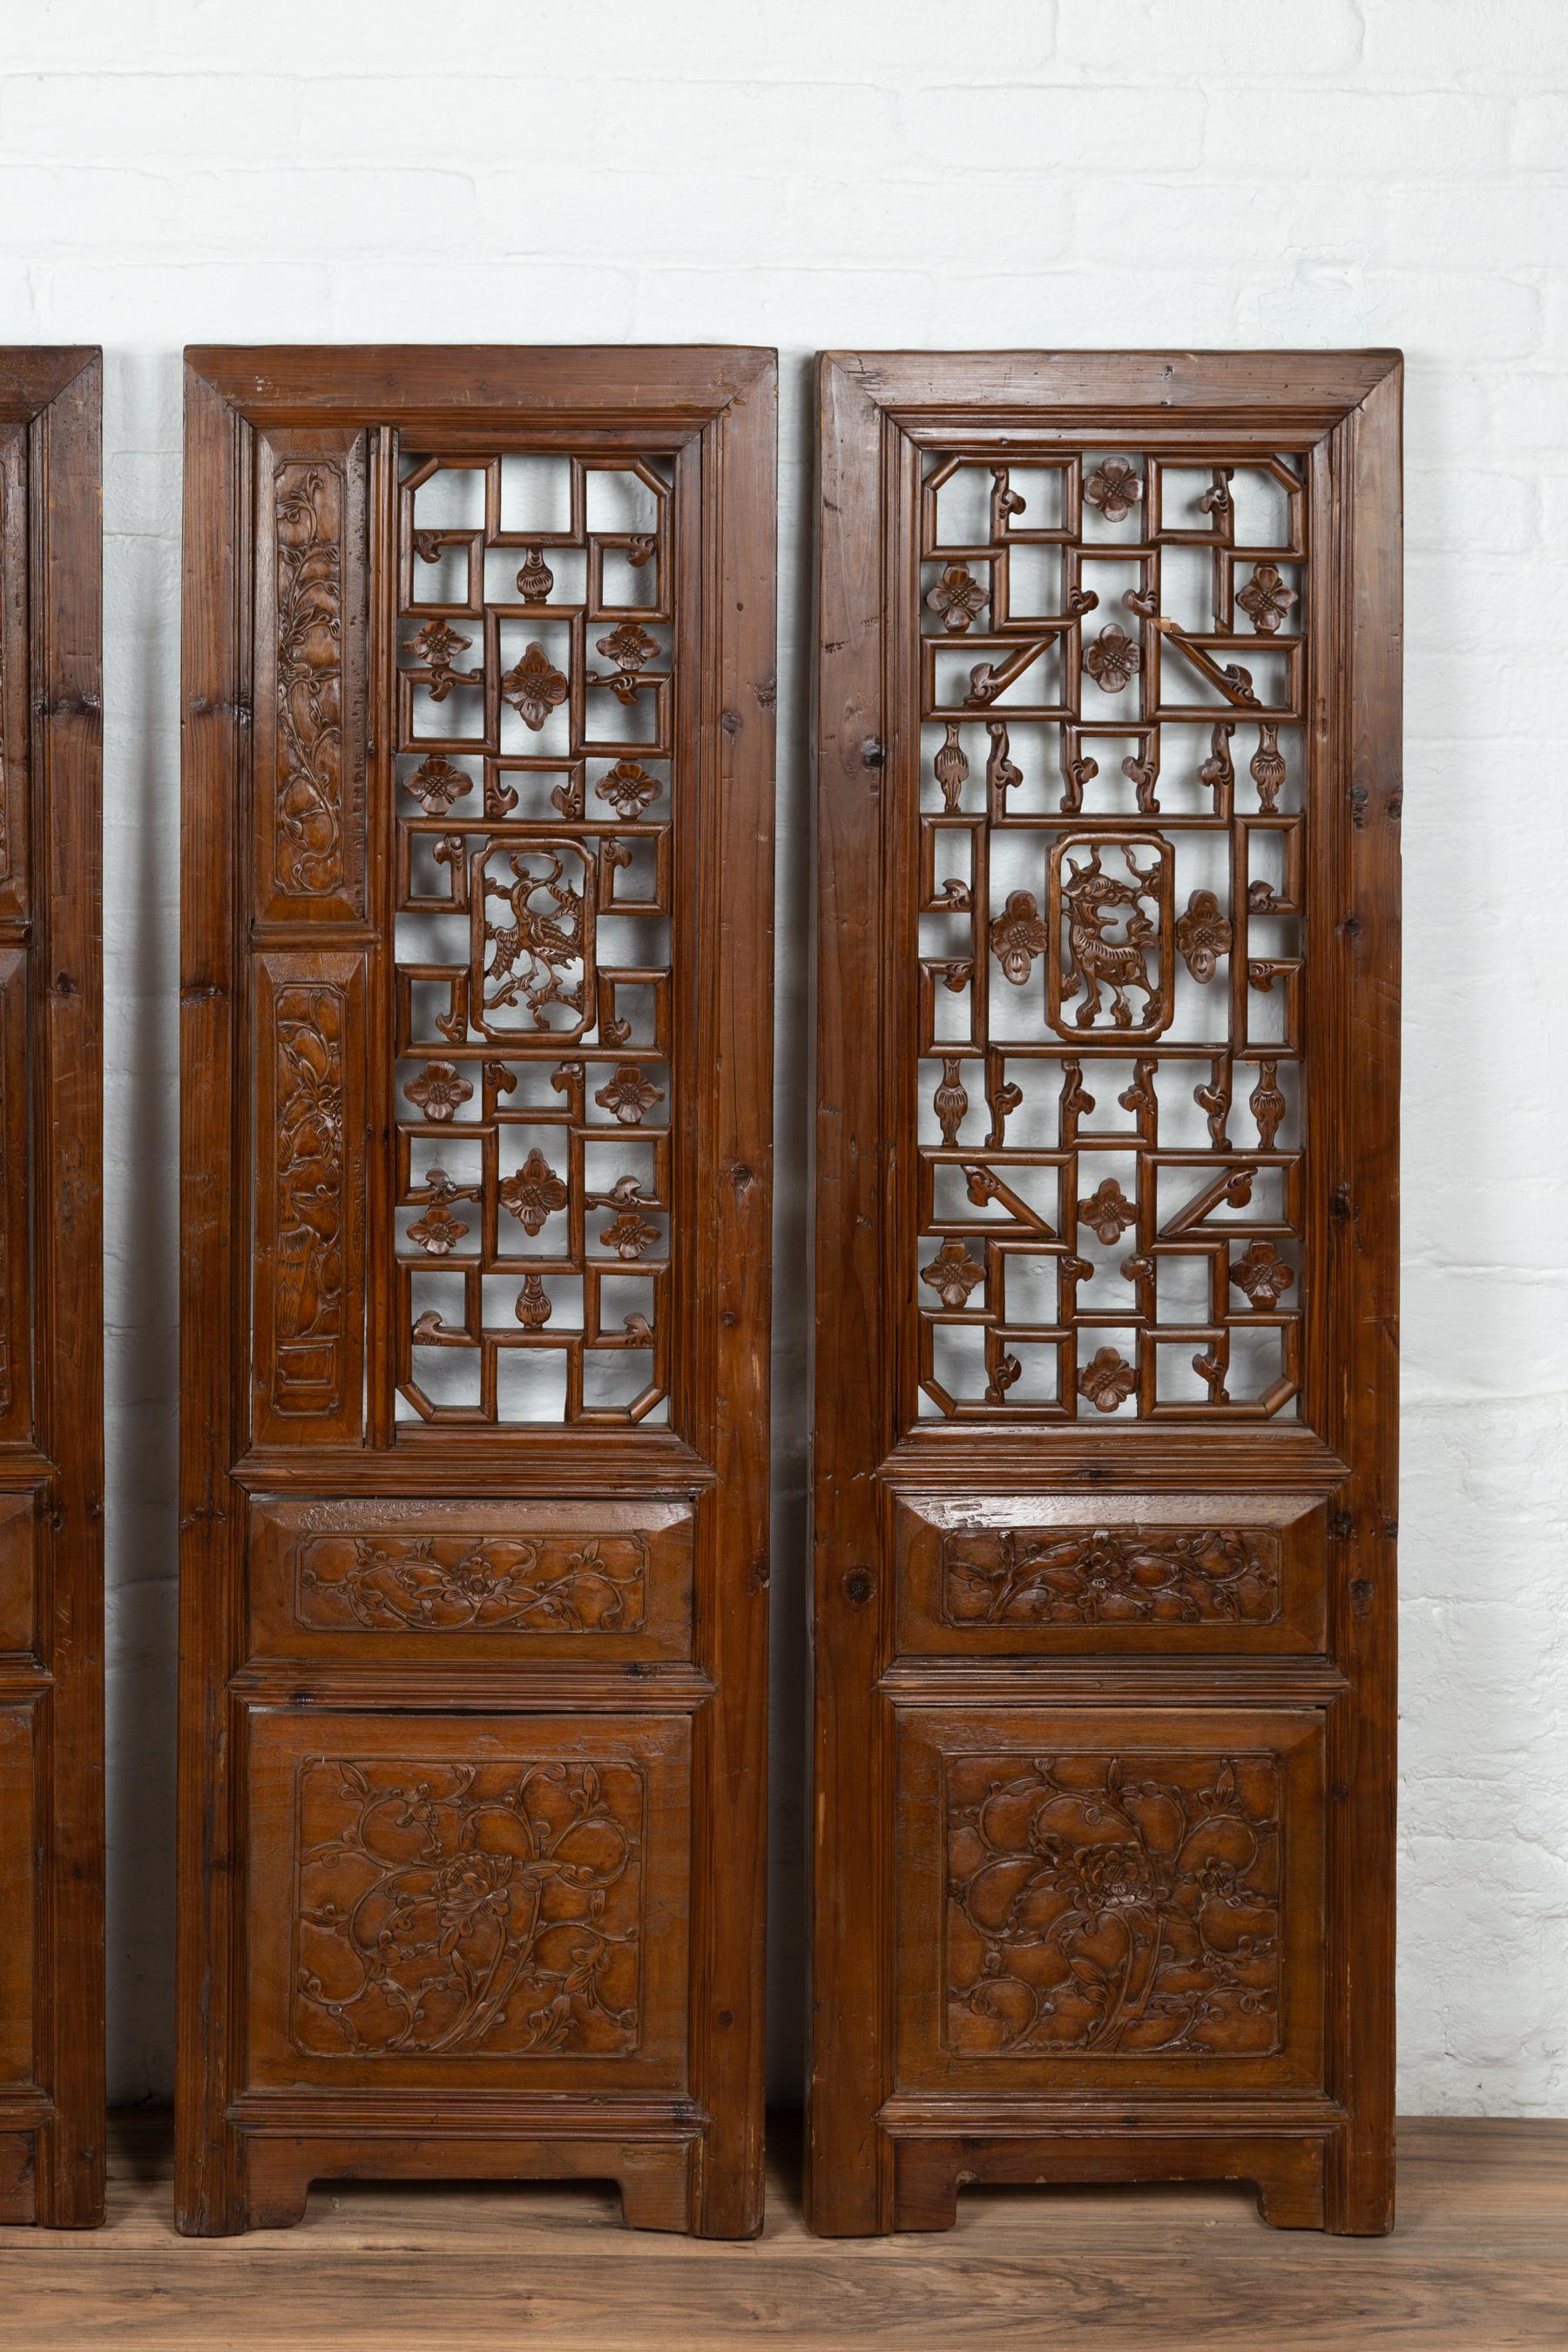 Set of Four Carved Elm Screen Panels with Fretwork, Foliage and Floral Motifs For Sale 5